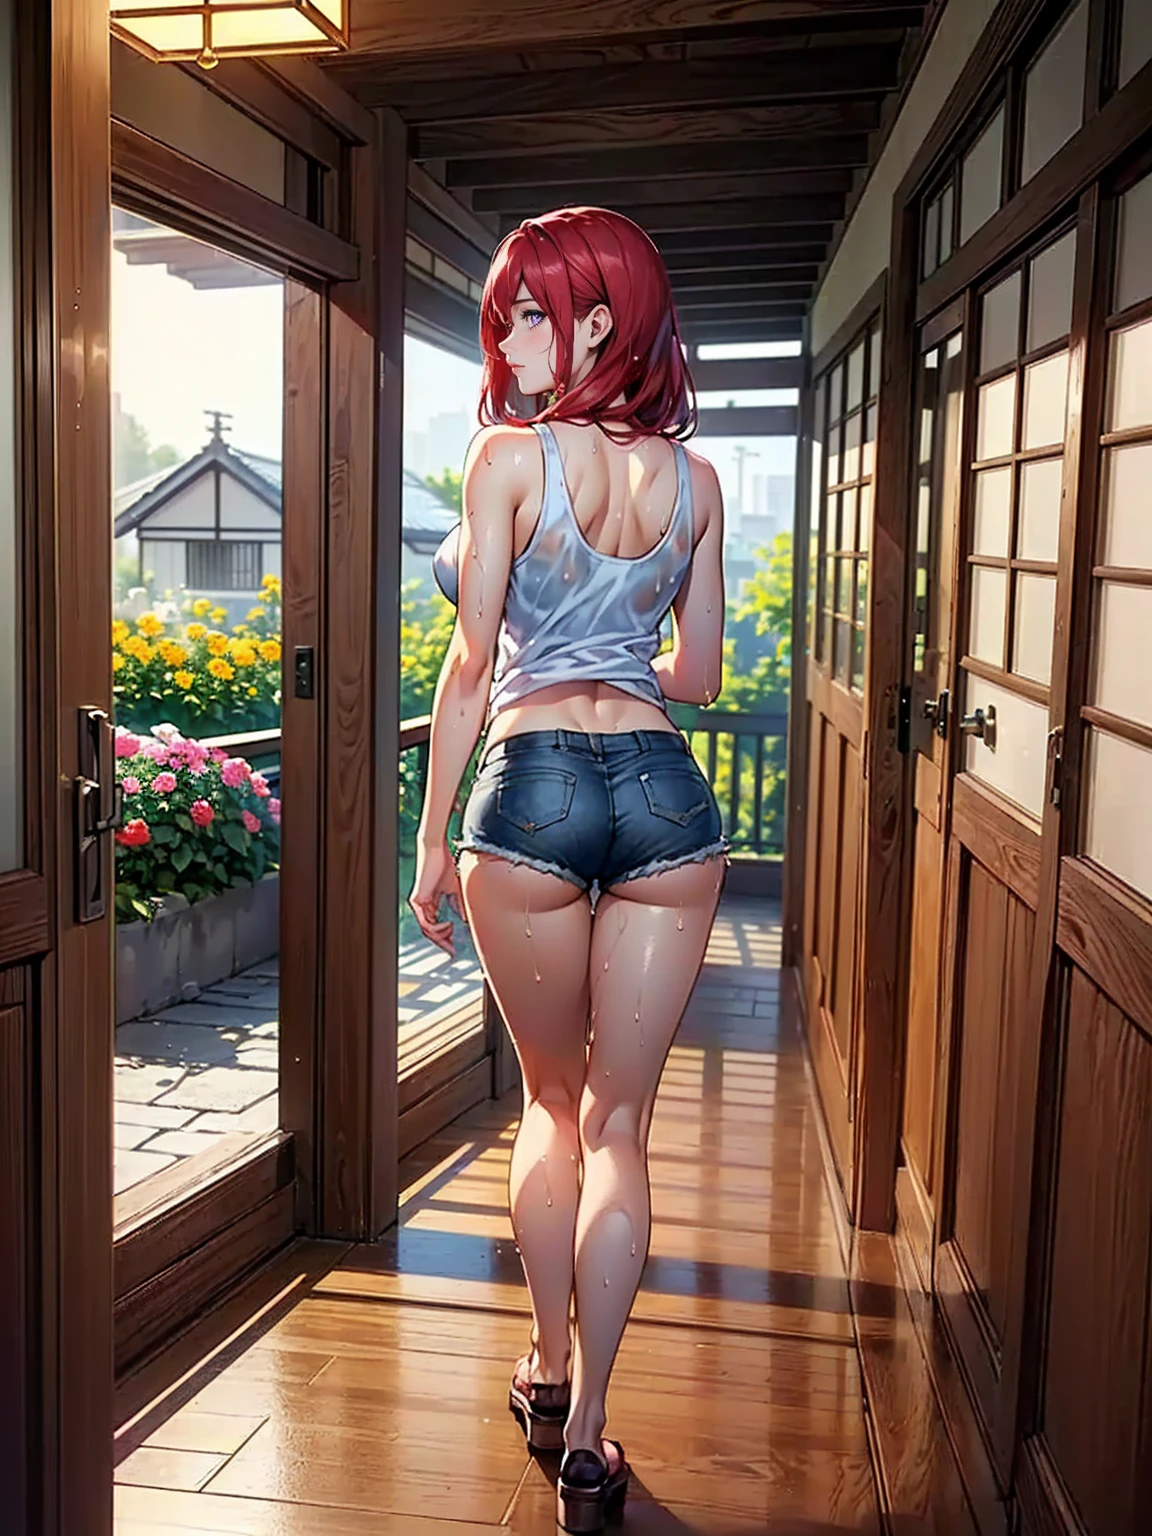 ((1girl, alone, solo, 1woman, TakashiroHiroko, dark purple eyes, red hair, TakashiroHiroko, Extremely detailed, ambient soft lighting, 4k, perfect eyes, a perfect face, perfect lighting, a 1girl)), ((solo, 1woman, Extremely detailed, ambient soft lighting, 4k, perfect eyes, a perfect face, perfect lighting, a 1girl)), (((big ass, from the back, looking behind, , yellow tank top, (revealing wet tank top, tank top revealing the breasts), women's tank top, wet yellow tank) top, transparent, transparency, mini shorts, jean shorts, navel out, abdomen showing, wet body, wooden house, classic Japanese house, old Japanese house , balcony, garden, flowers, walking in the hallway))